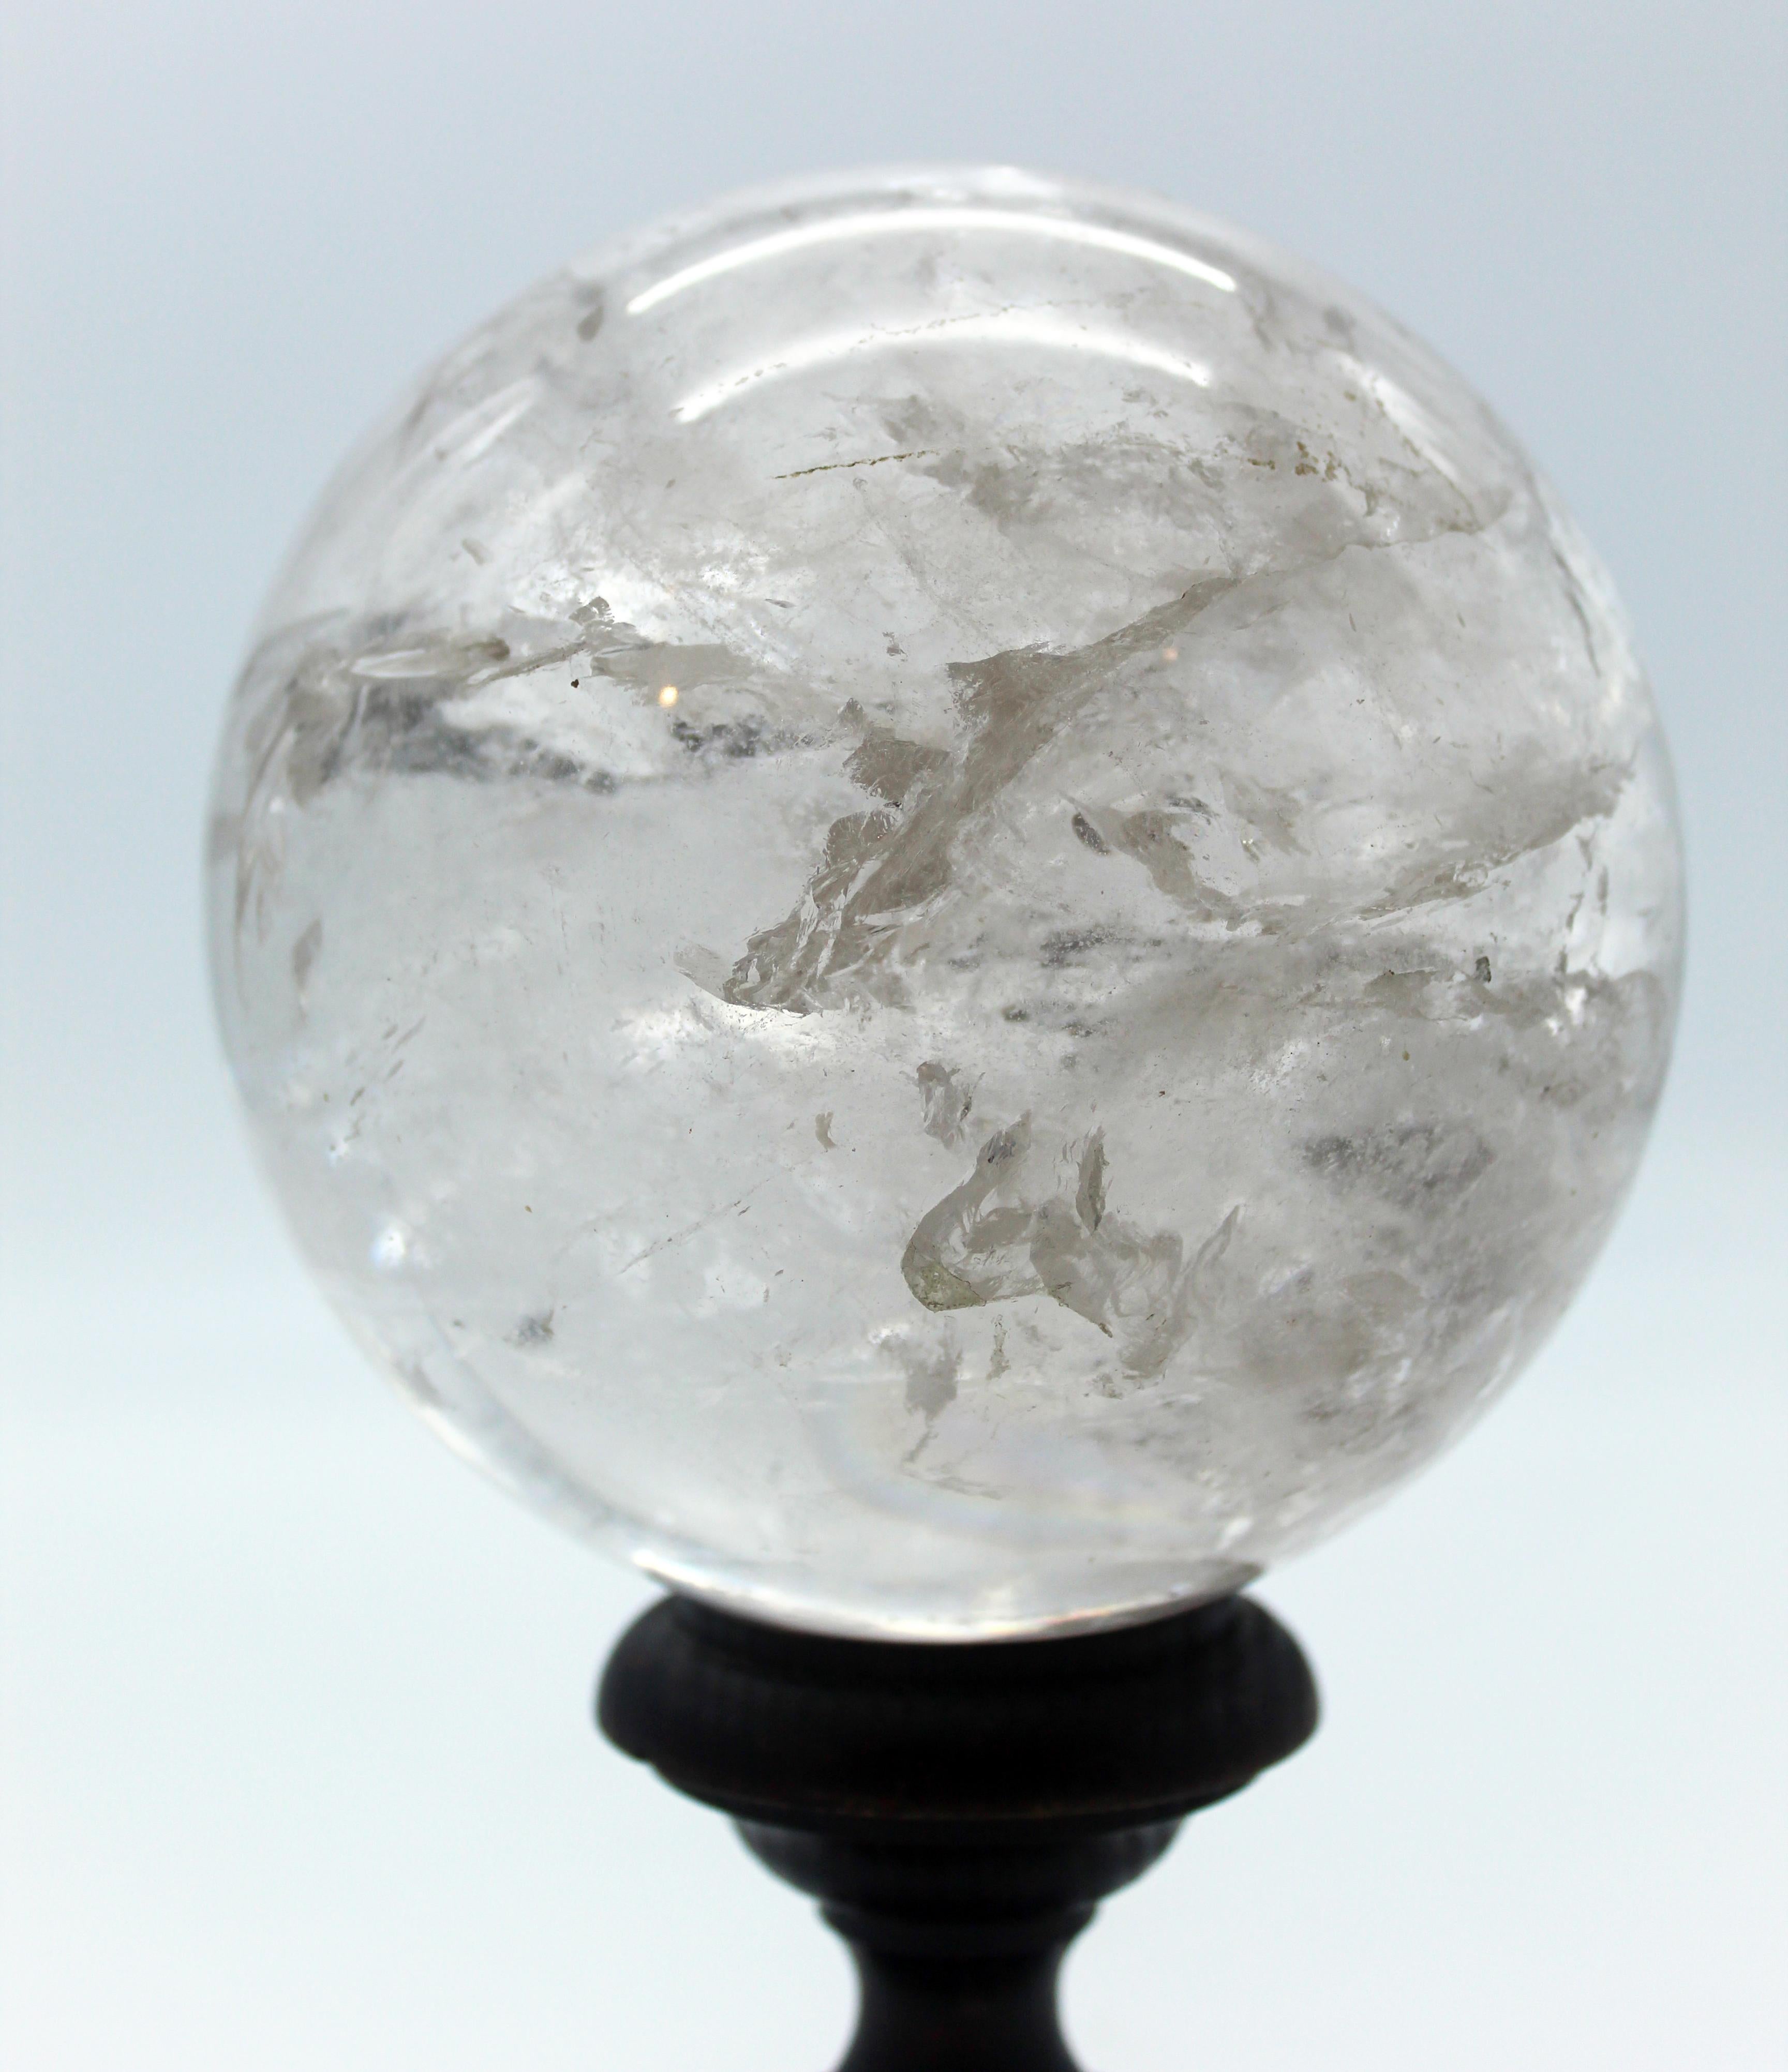 A very impressive sculpture of sphere, made in a huge rock crystal; the sphere is a classical decorative object and a must for collectors.